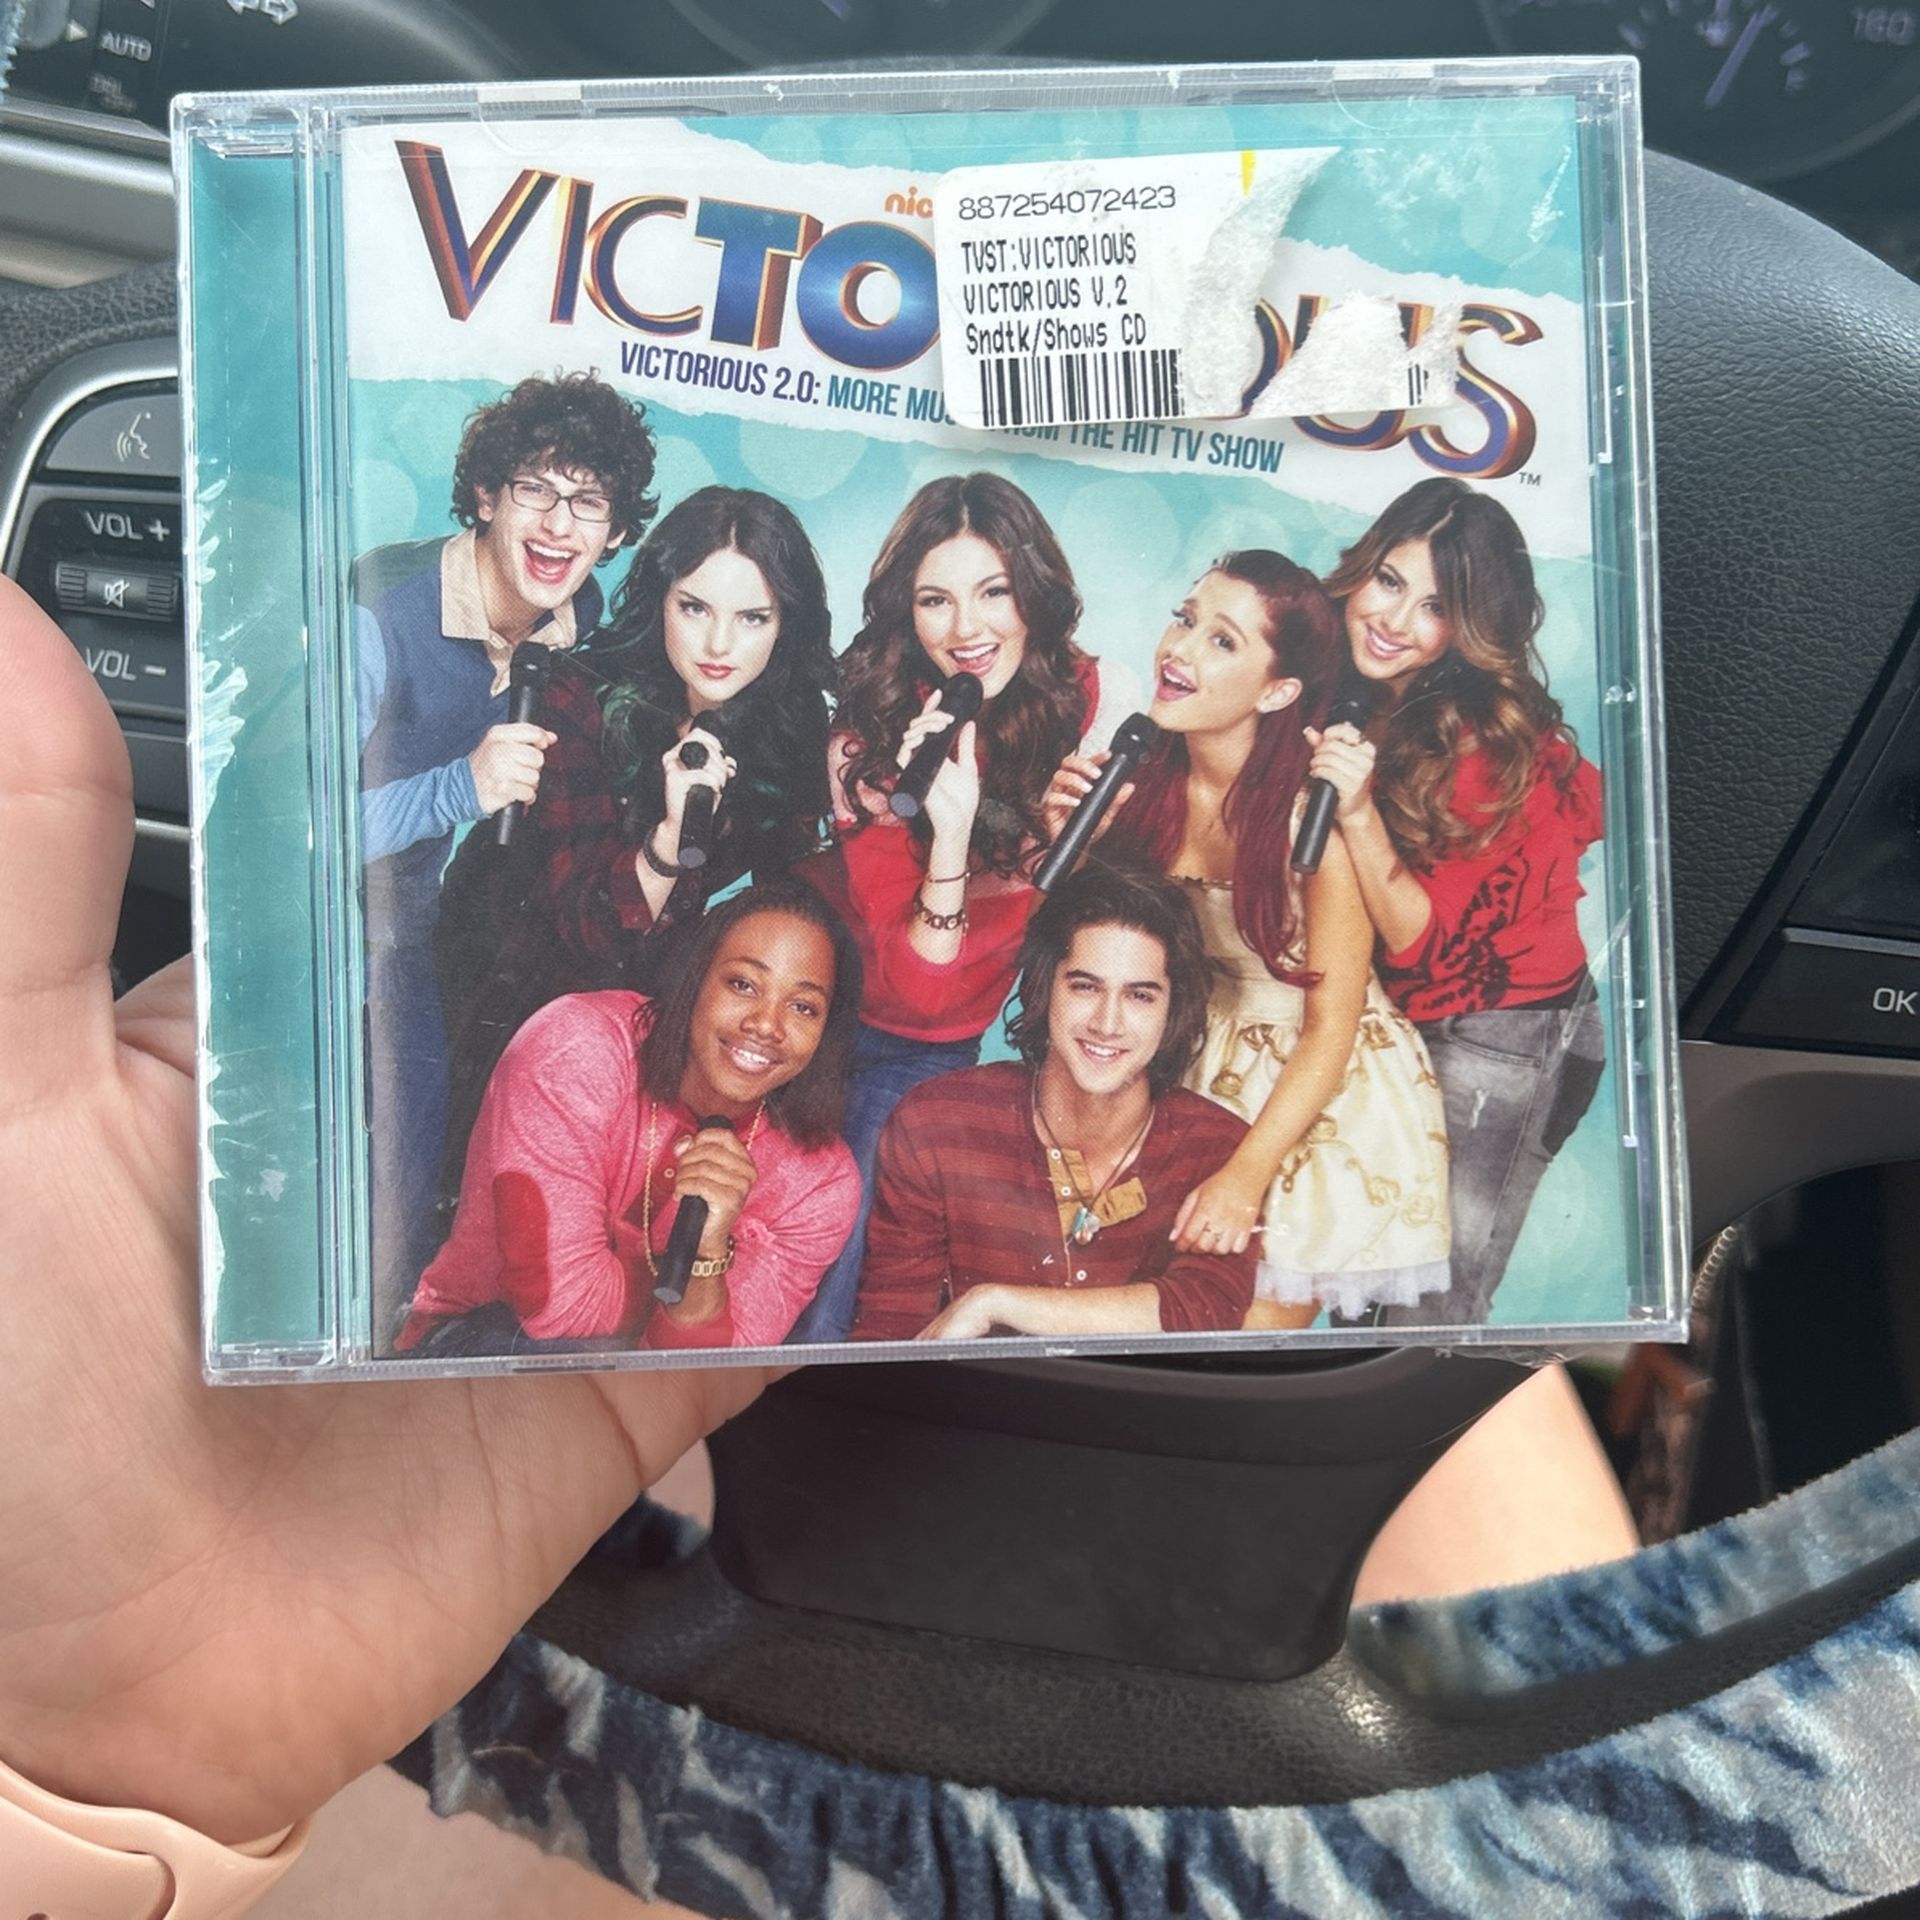 Victorious 2.0 CD